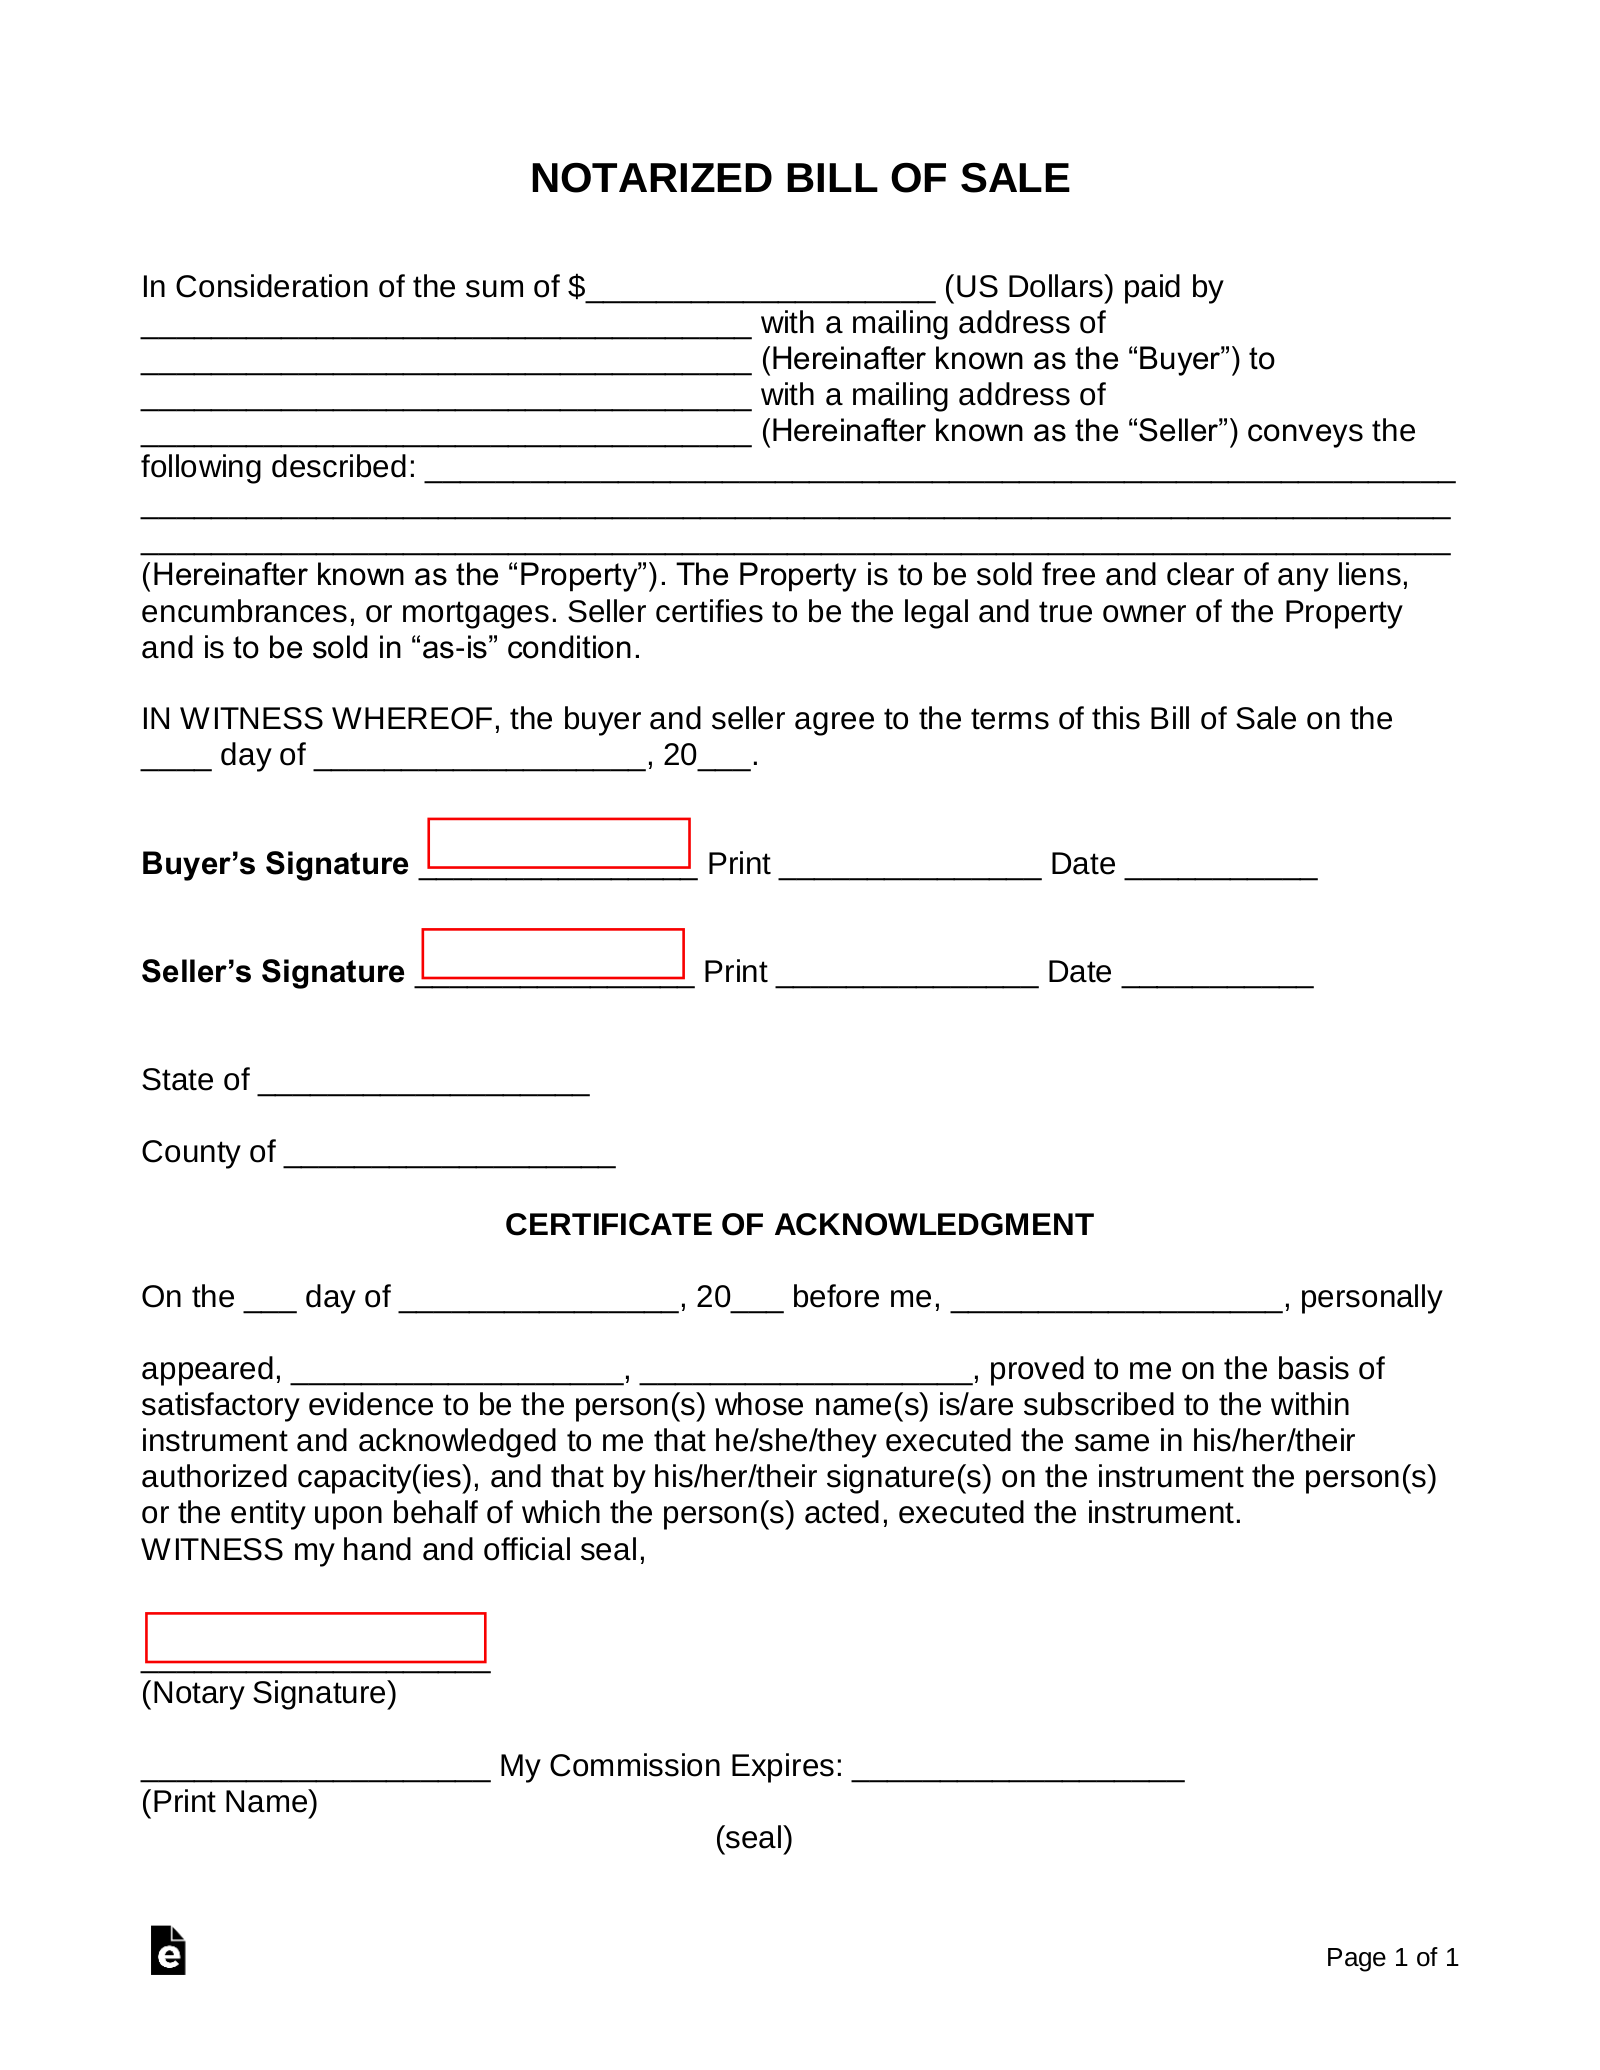 free-notarized-bill-of-sale-form-pdf-word-eforms-does-a-bill-of